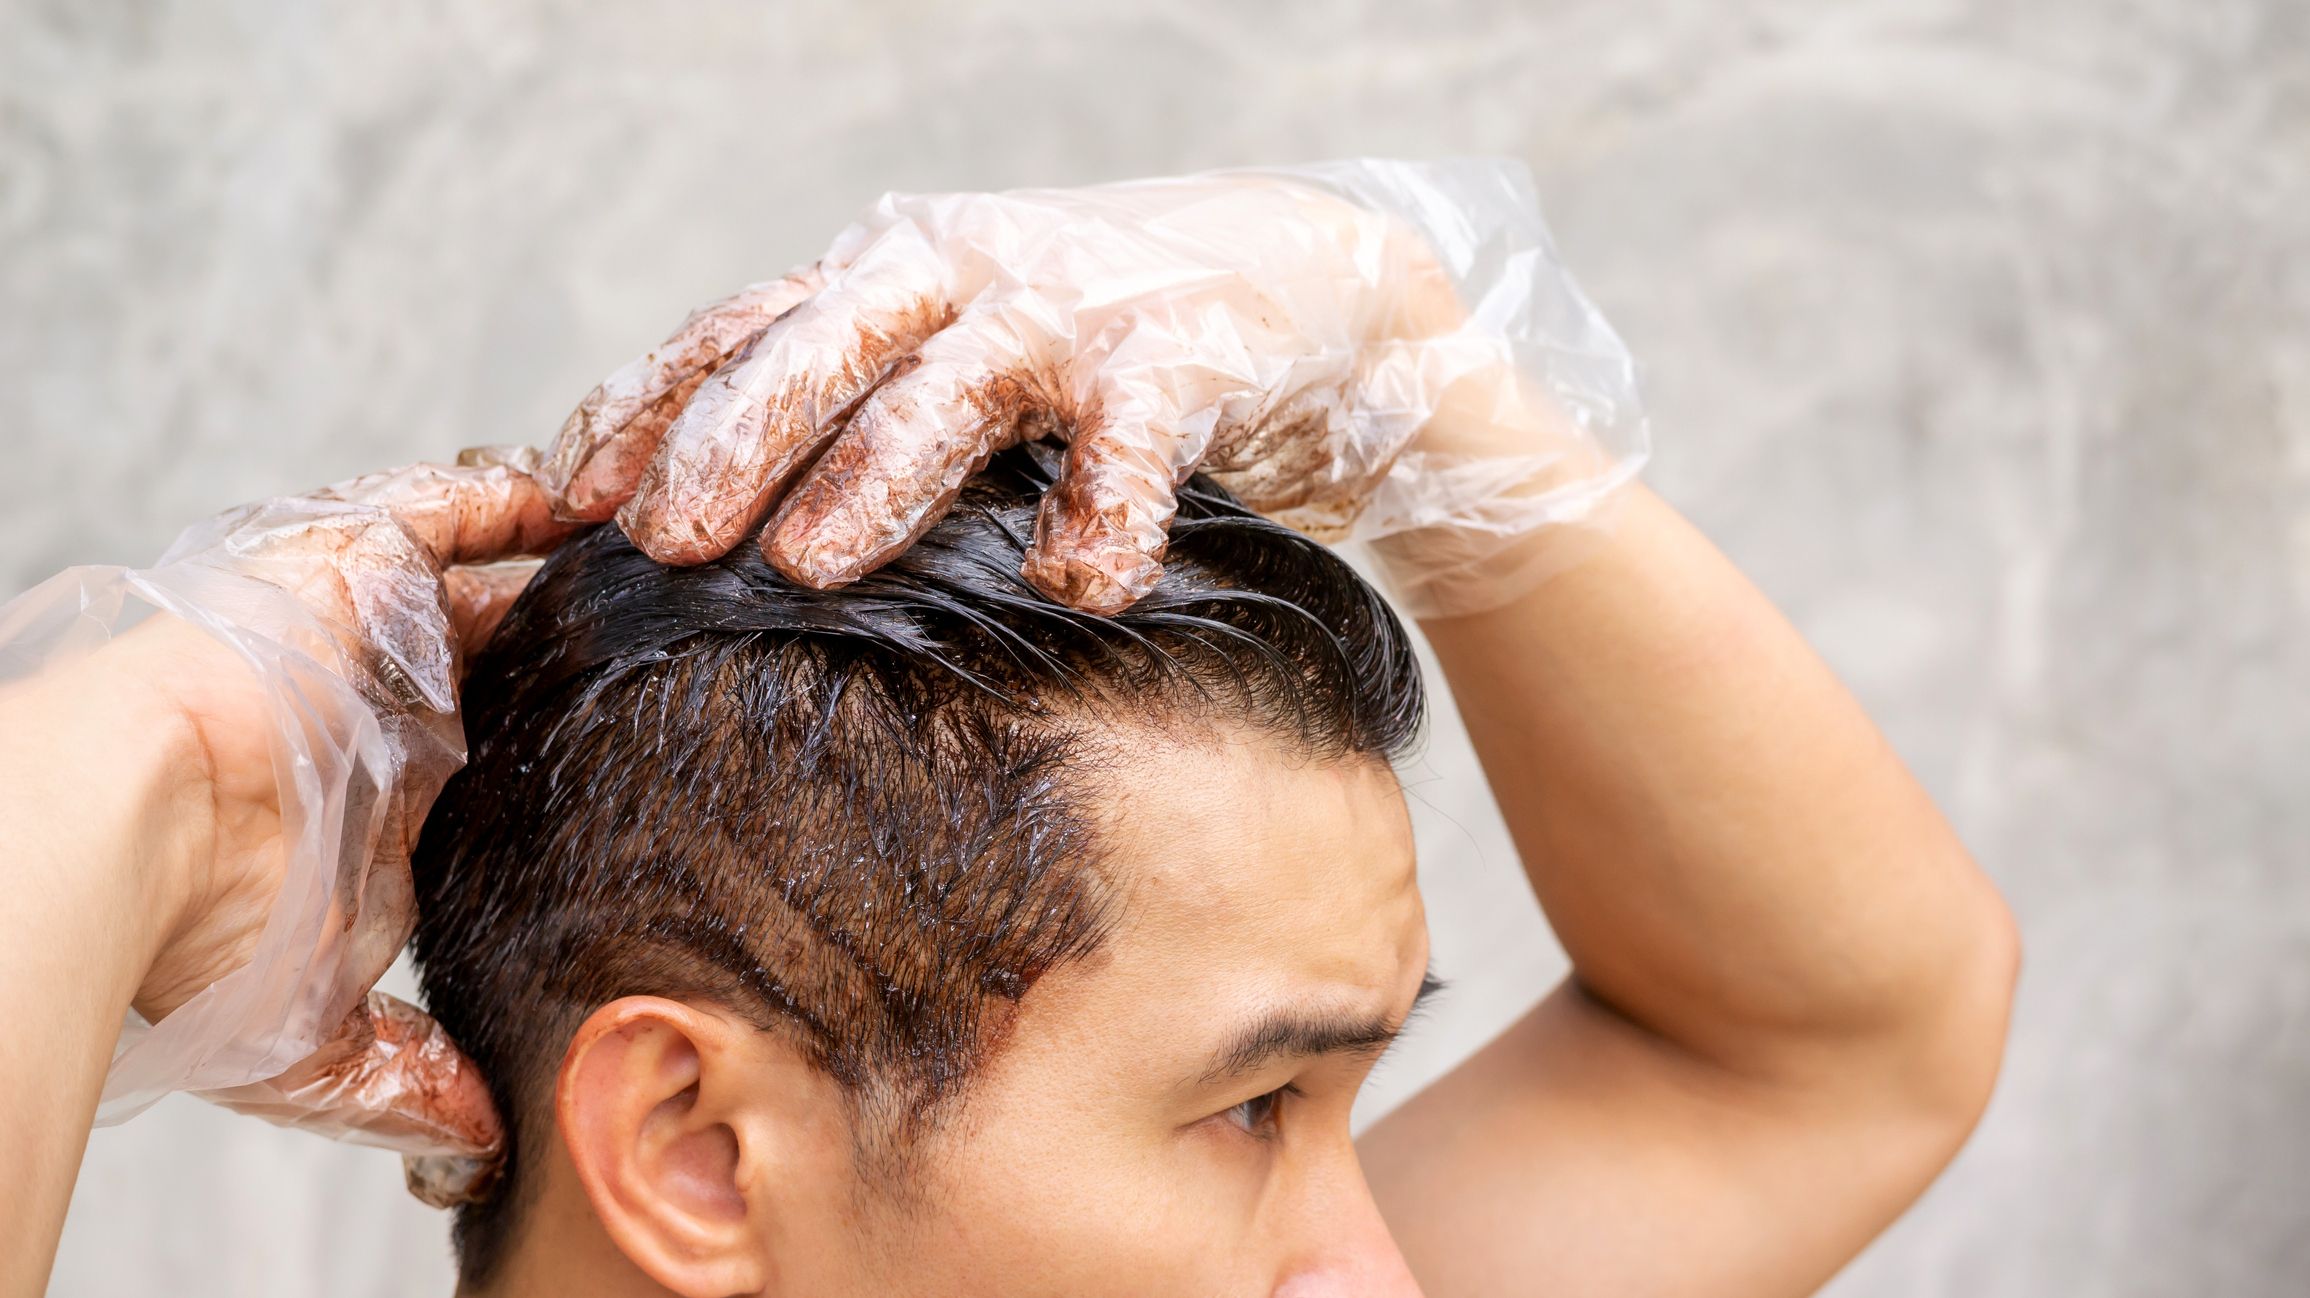 Scalp Bleaching How to Try it Safely Risks and Side Effects